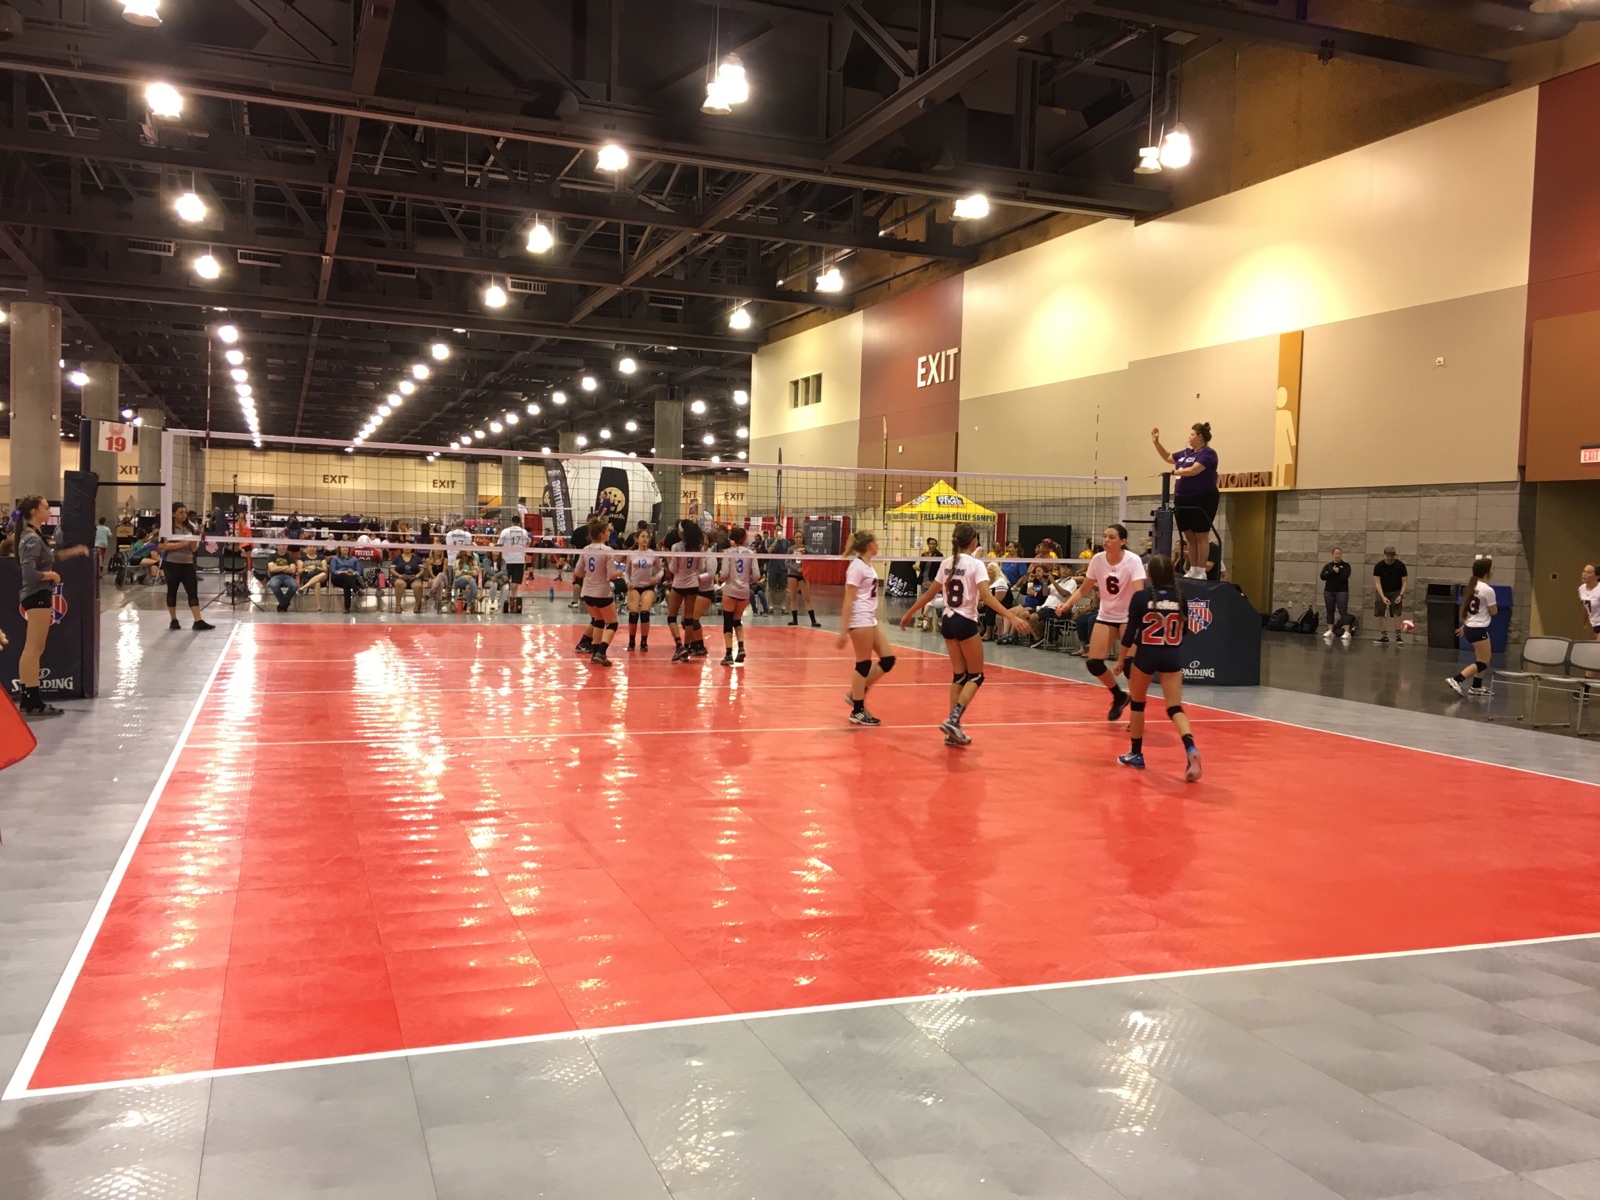 Thousands of players in downtown Phoenix for Volleyball Festival KPNX